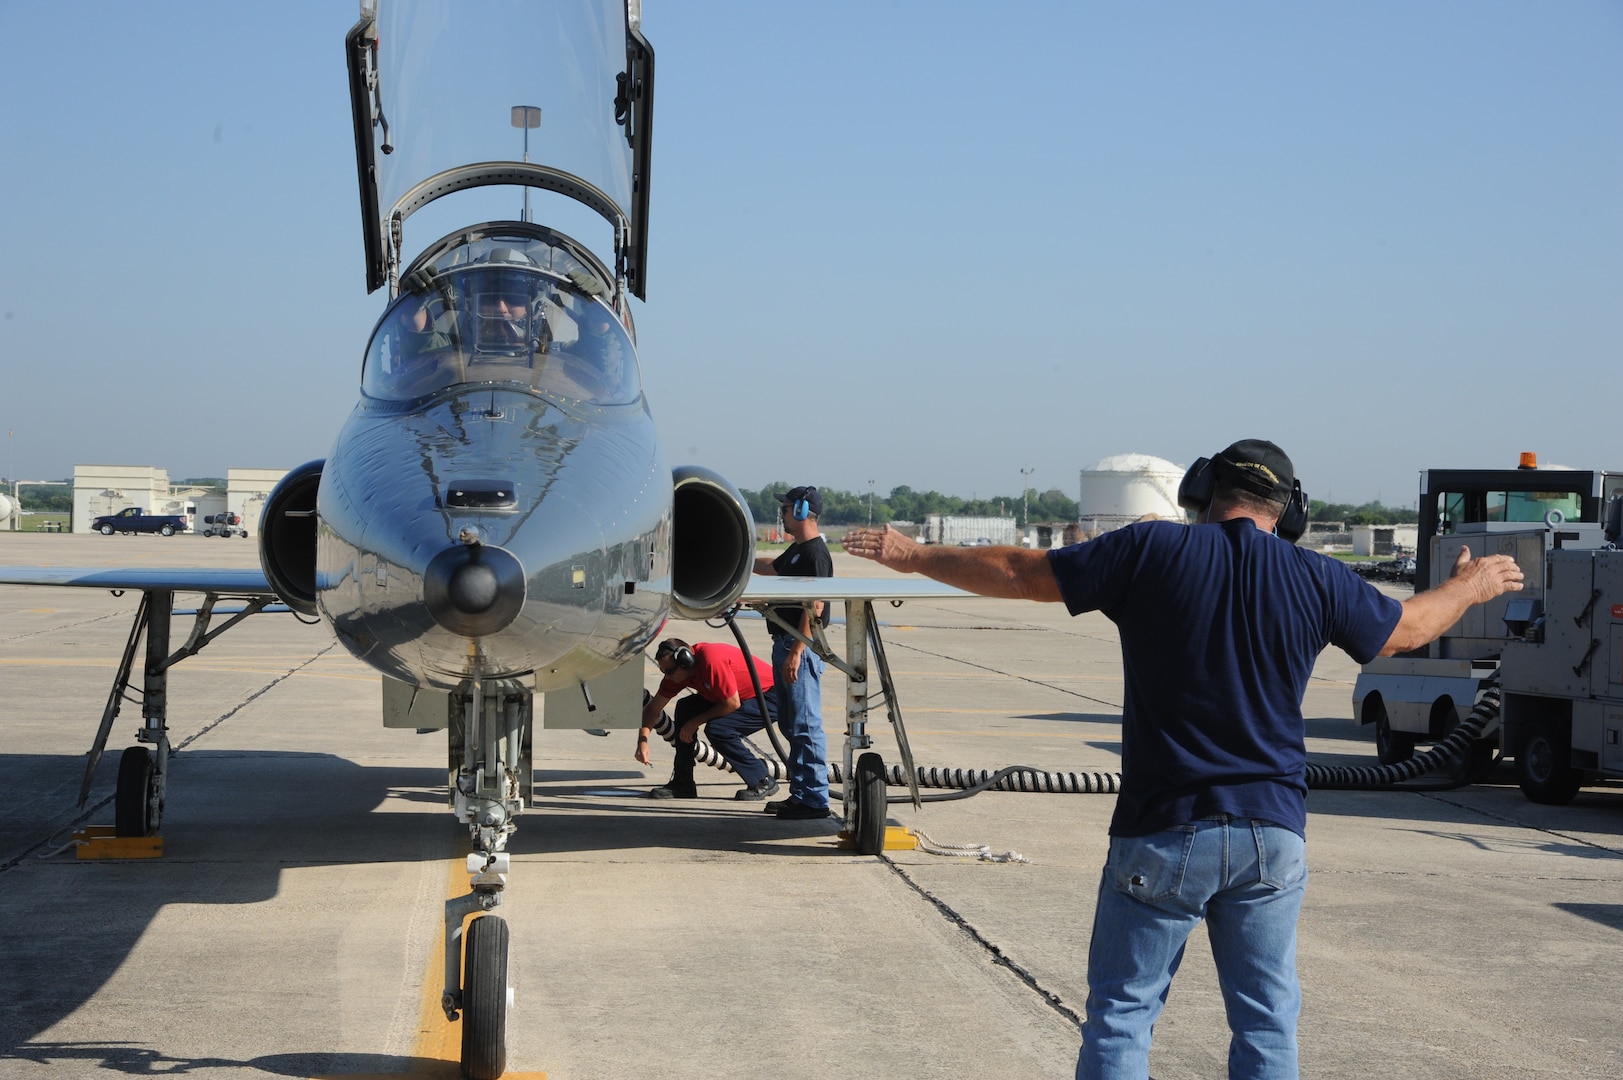 Keith Barnes (right), Jack Pagel (center) and Chuck Cornwall, 571st Aircraft Maintenance Squadron contractors, perform final checks to the T-38 Talon prior to Lt. Col. Ripley Woodard, 415th Flight Test Flight commander, taking off from Joint Base San Antonio-Randolph, Texas May 17. The T-38 is being returned to Sheppard Air Force Base, Texas, after being modified by the 571st here. (U.S. Air Force photo by Rich McFadden) 